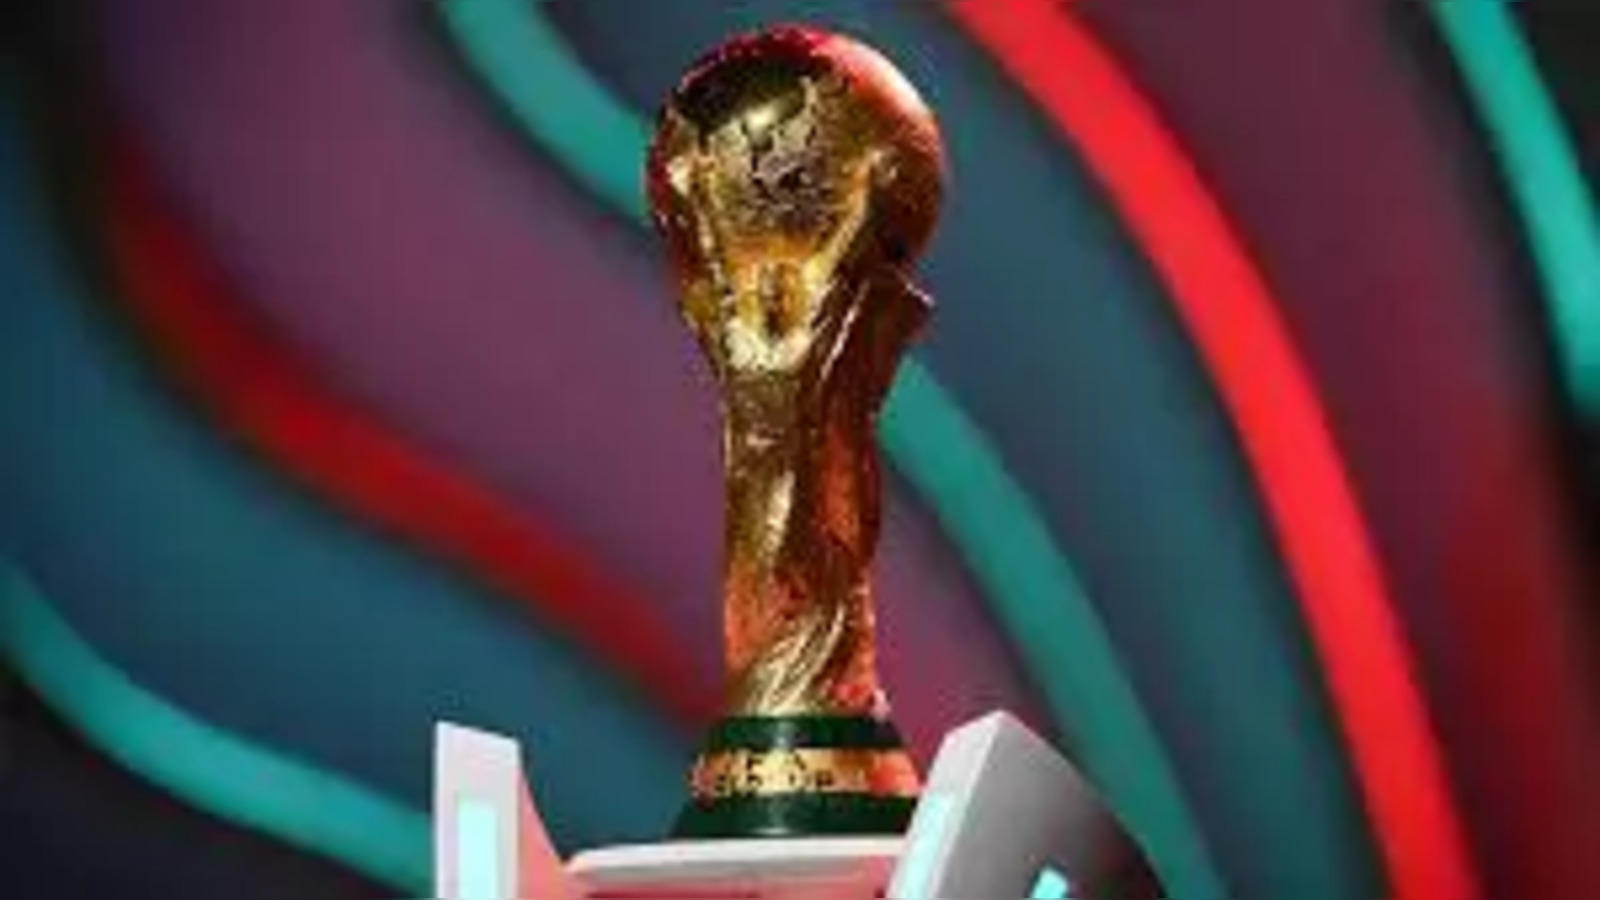 Watch FIFA World Cup Live Online (@FIFAWorldCup_us) / X